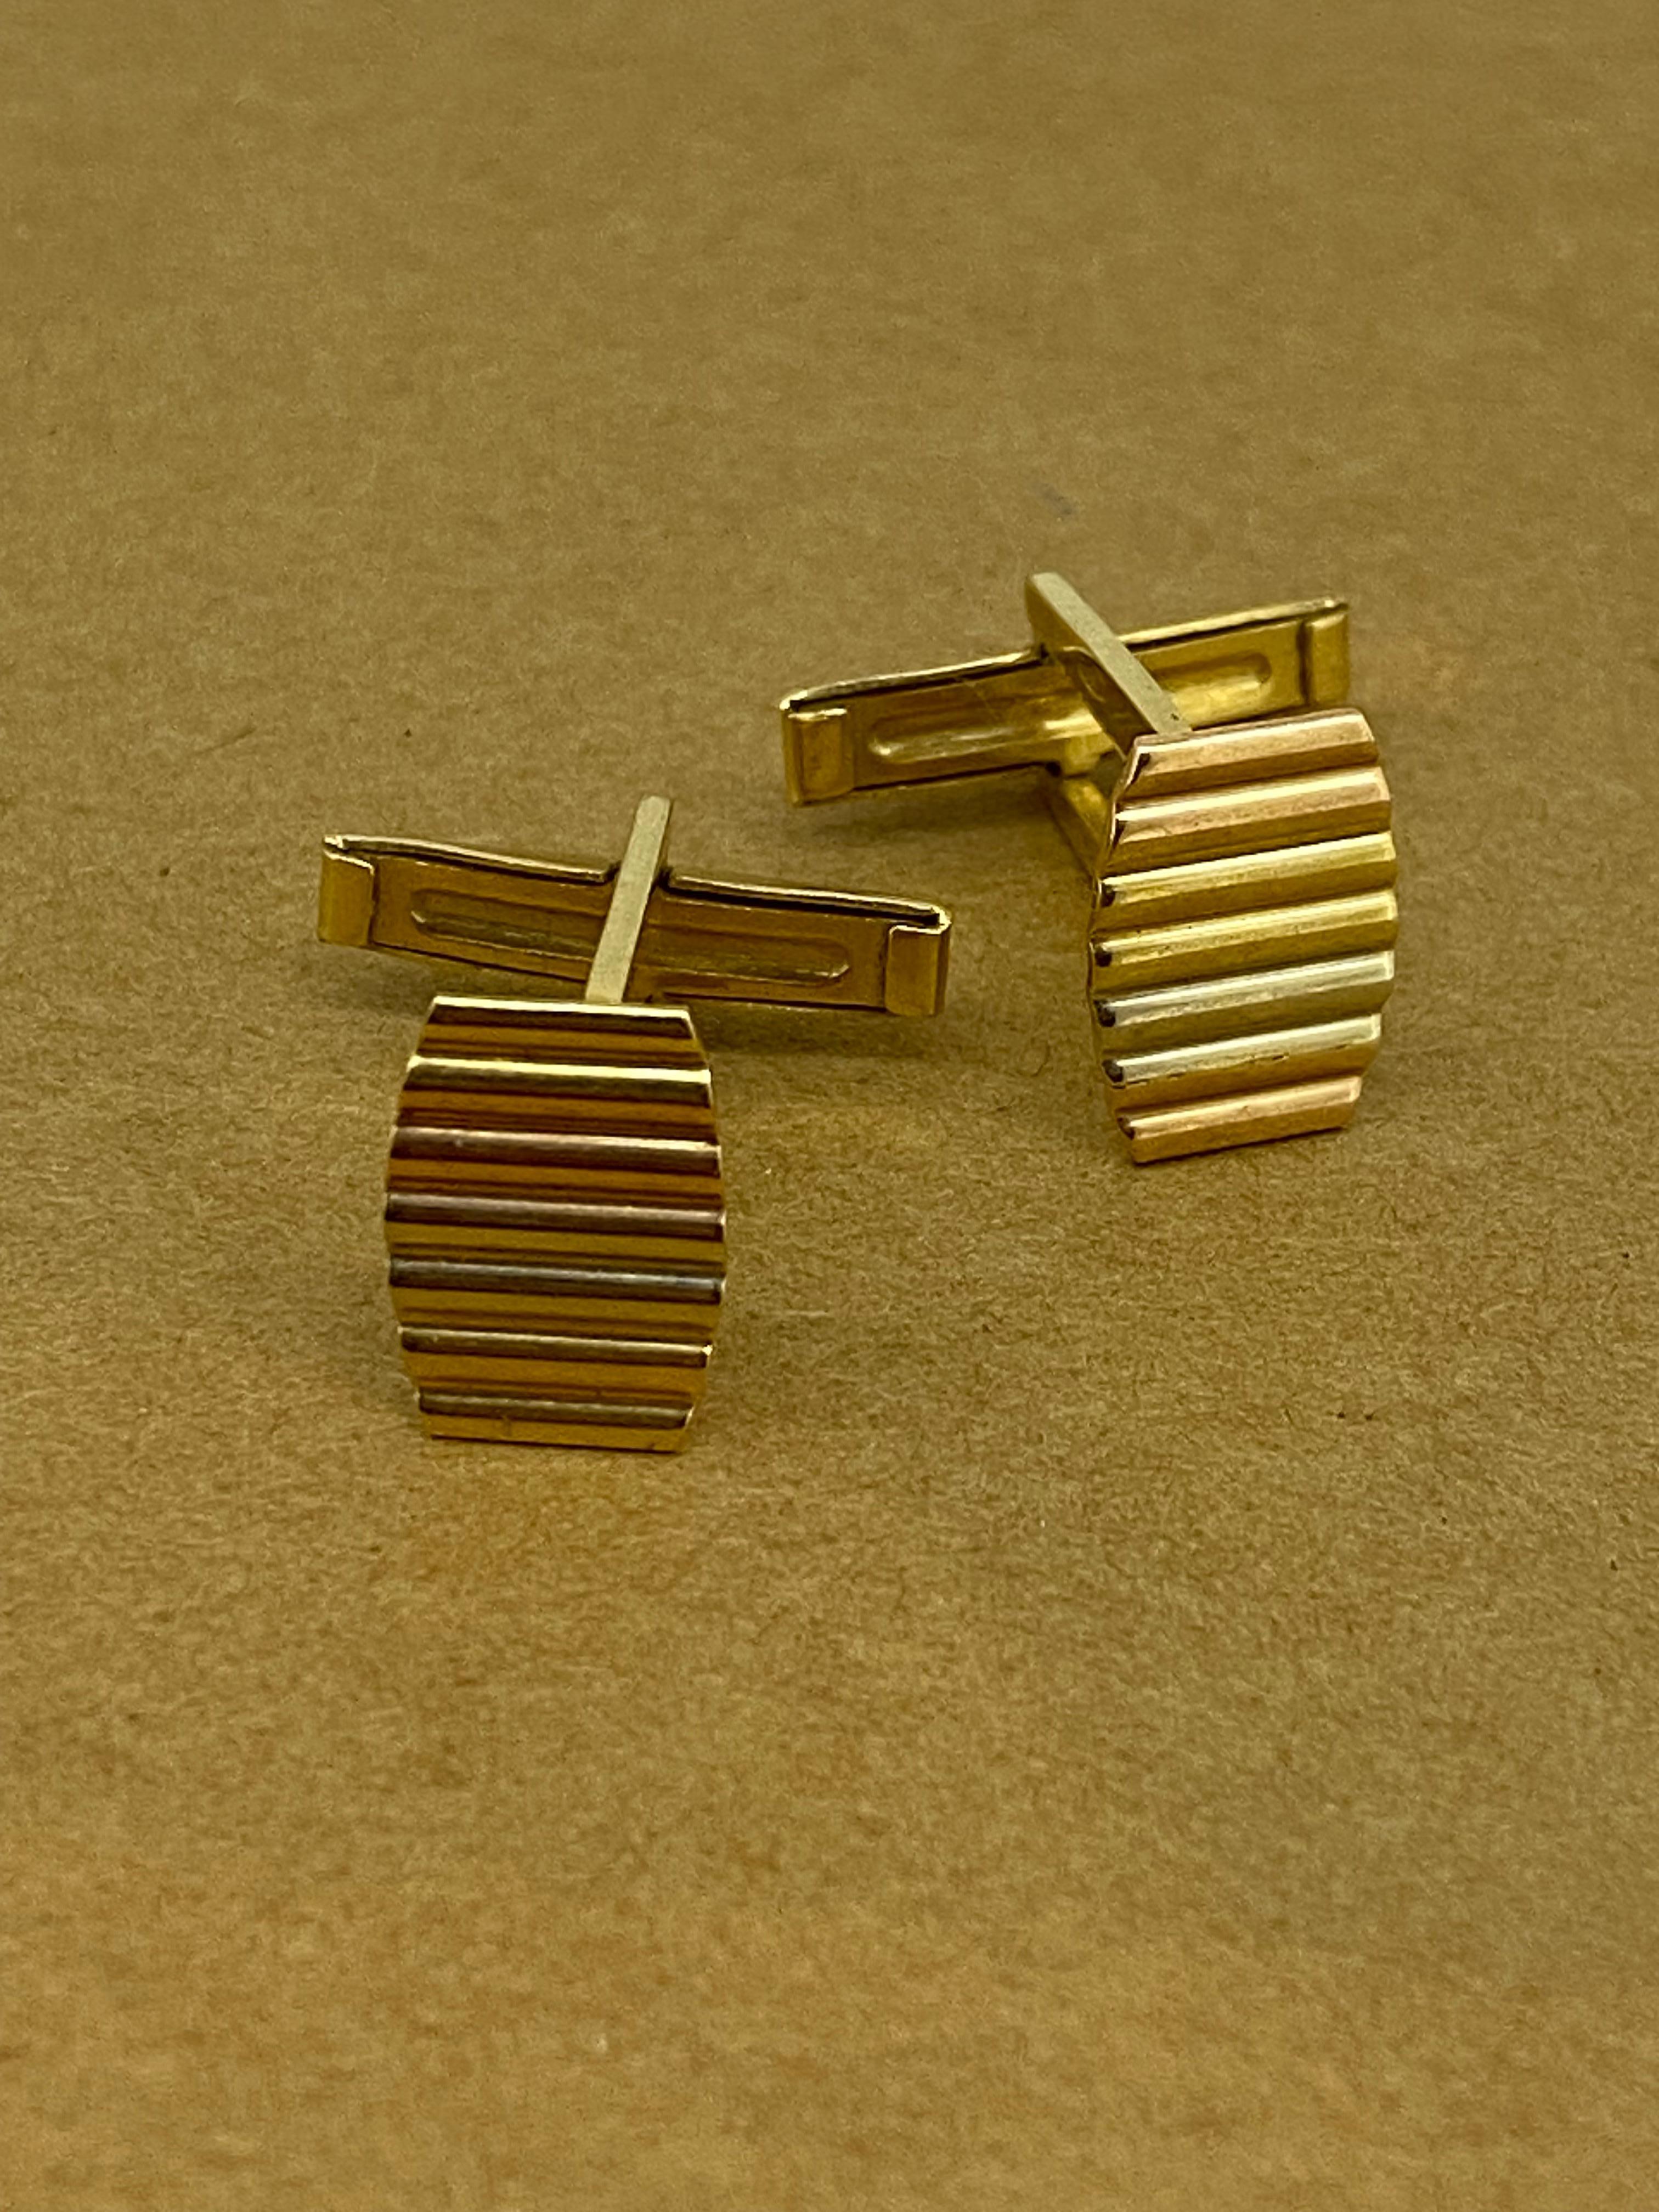 These exquisite Vintage Pair of Cufflinks

are crafted in 18K Tri-Colour Gold,

bearing Italian hallmarks & 750 stamp

 

Complete by bullet backs – with a bar attached to the bridge of the cufflinks, 

that rotates 90 degrees so that you can easily